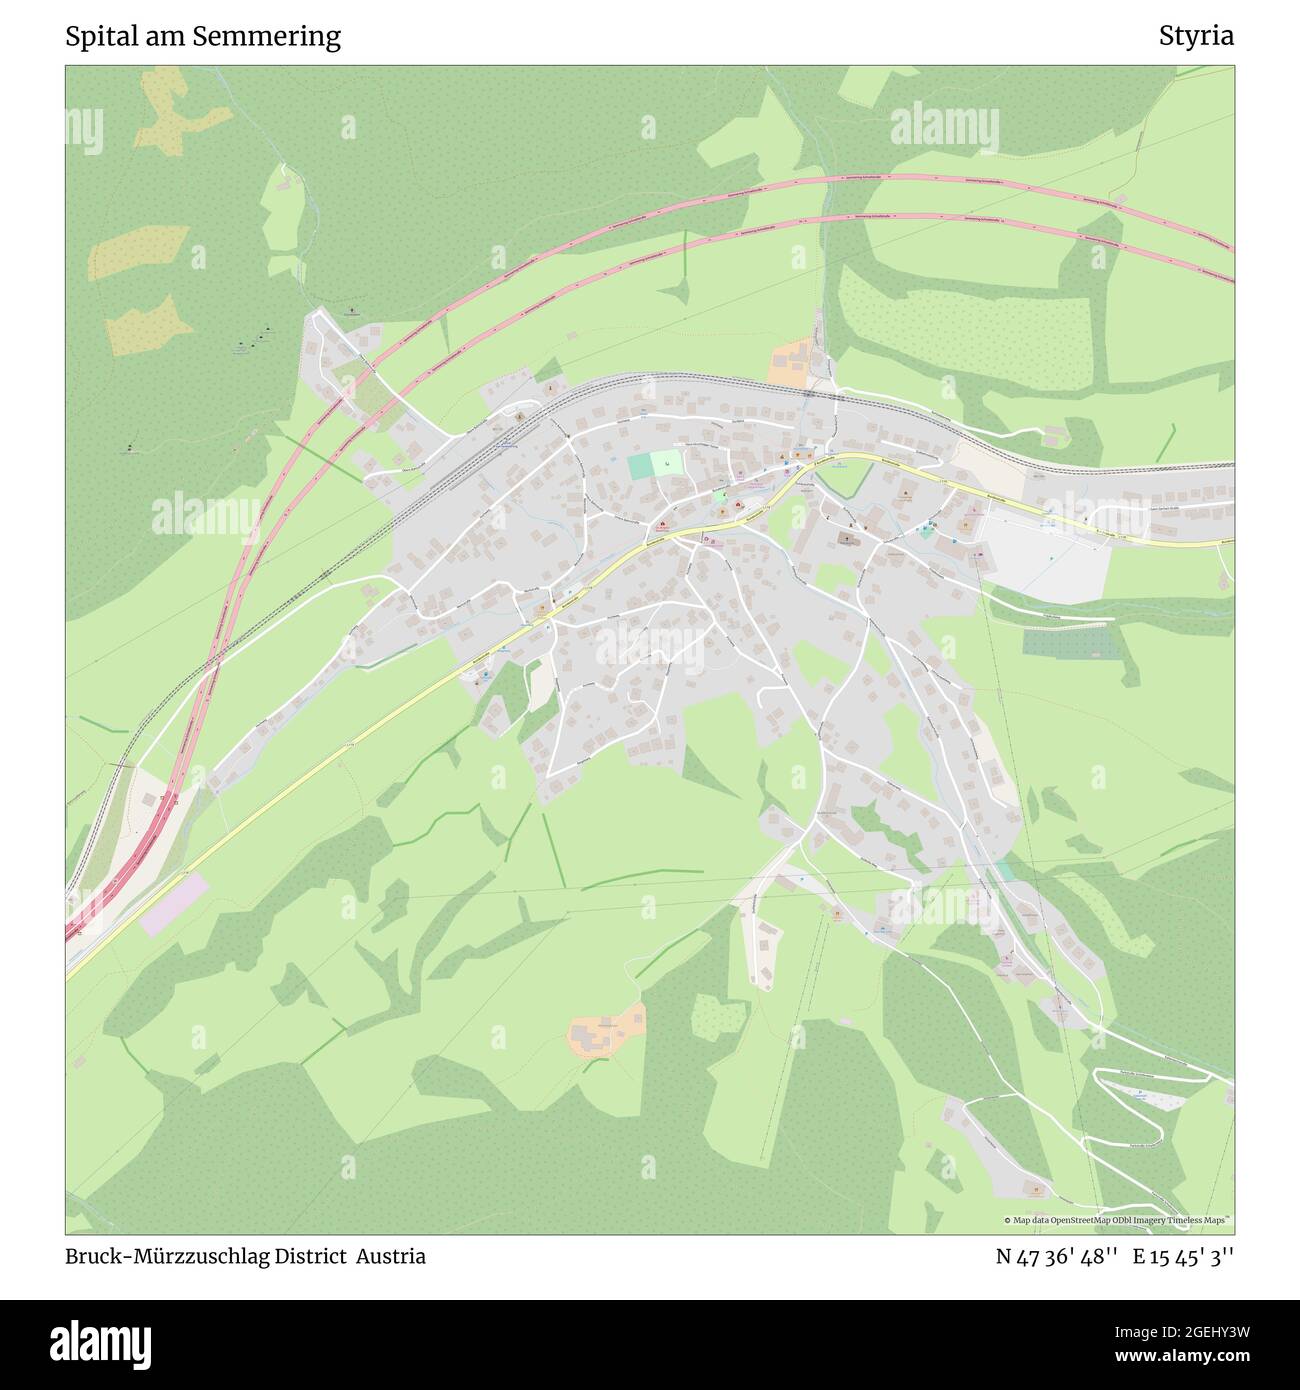 Spital am Semmering, Bruck-Mürzzuschlag District, Austria, Styria, N 47 36' 48'', E 15 45' 3'', map, Timeless Map published in 2021. Travelers, explorers and adventurers like Florence Nightingale, David Livingstone, Ernest Shackleton, Lewis and Clark and Sherlock Holmes relied on maps to plan travels to the world's most remote corners, Timeless Maps is mapping most locations on the globe, showing the achievement of great dreams Stock Photo